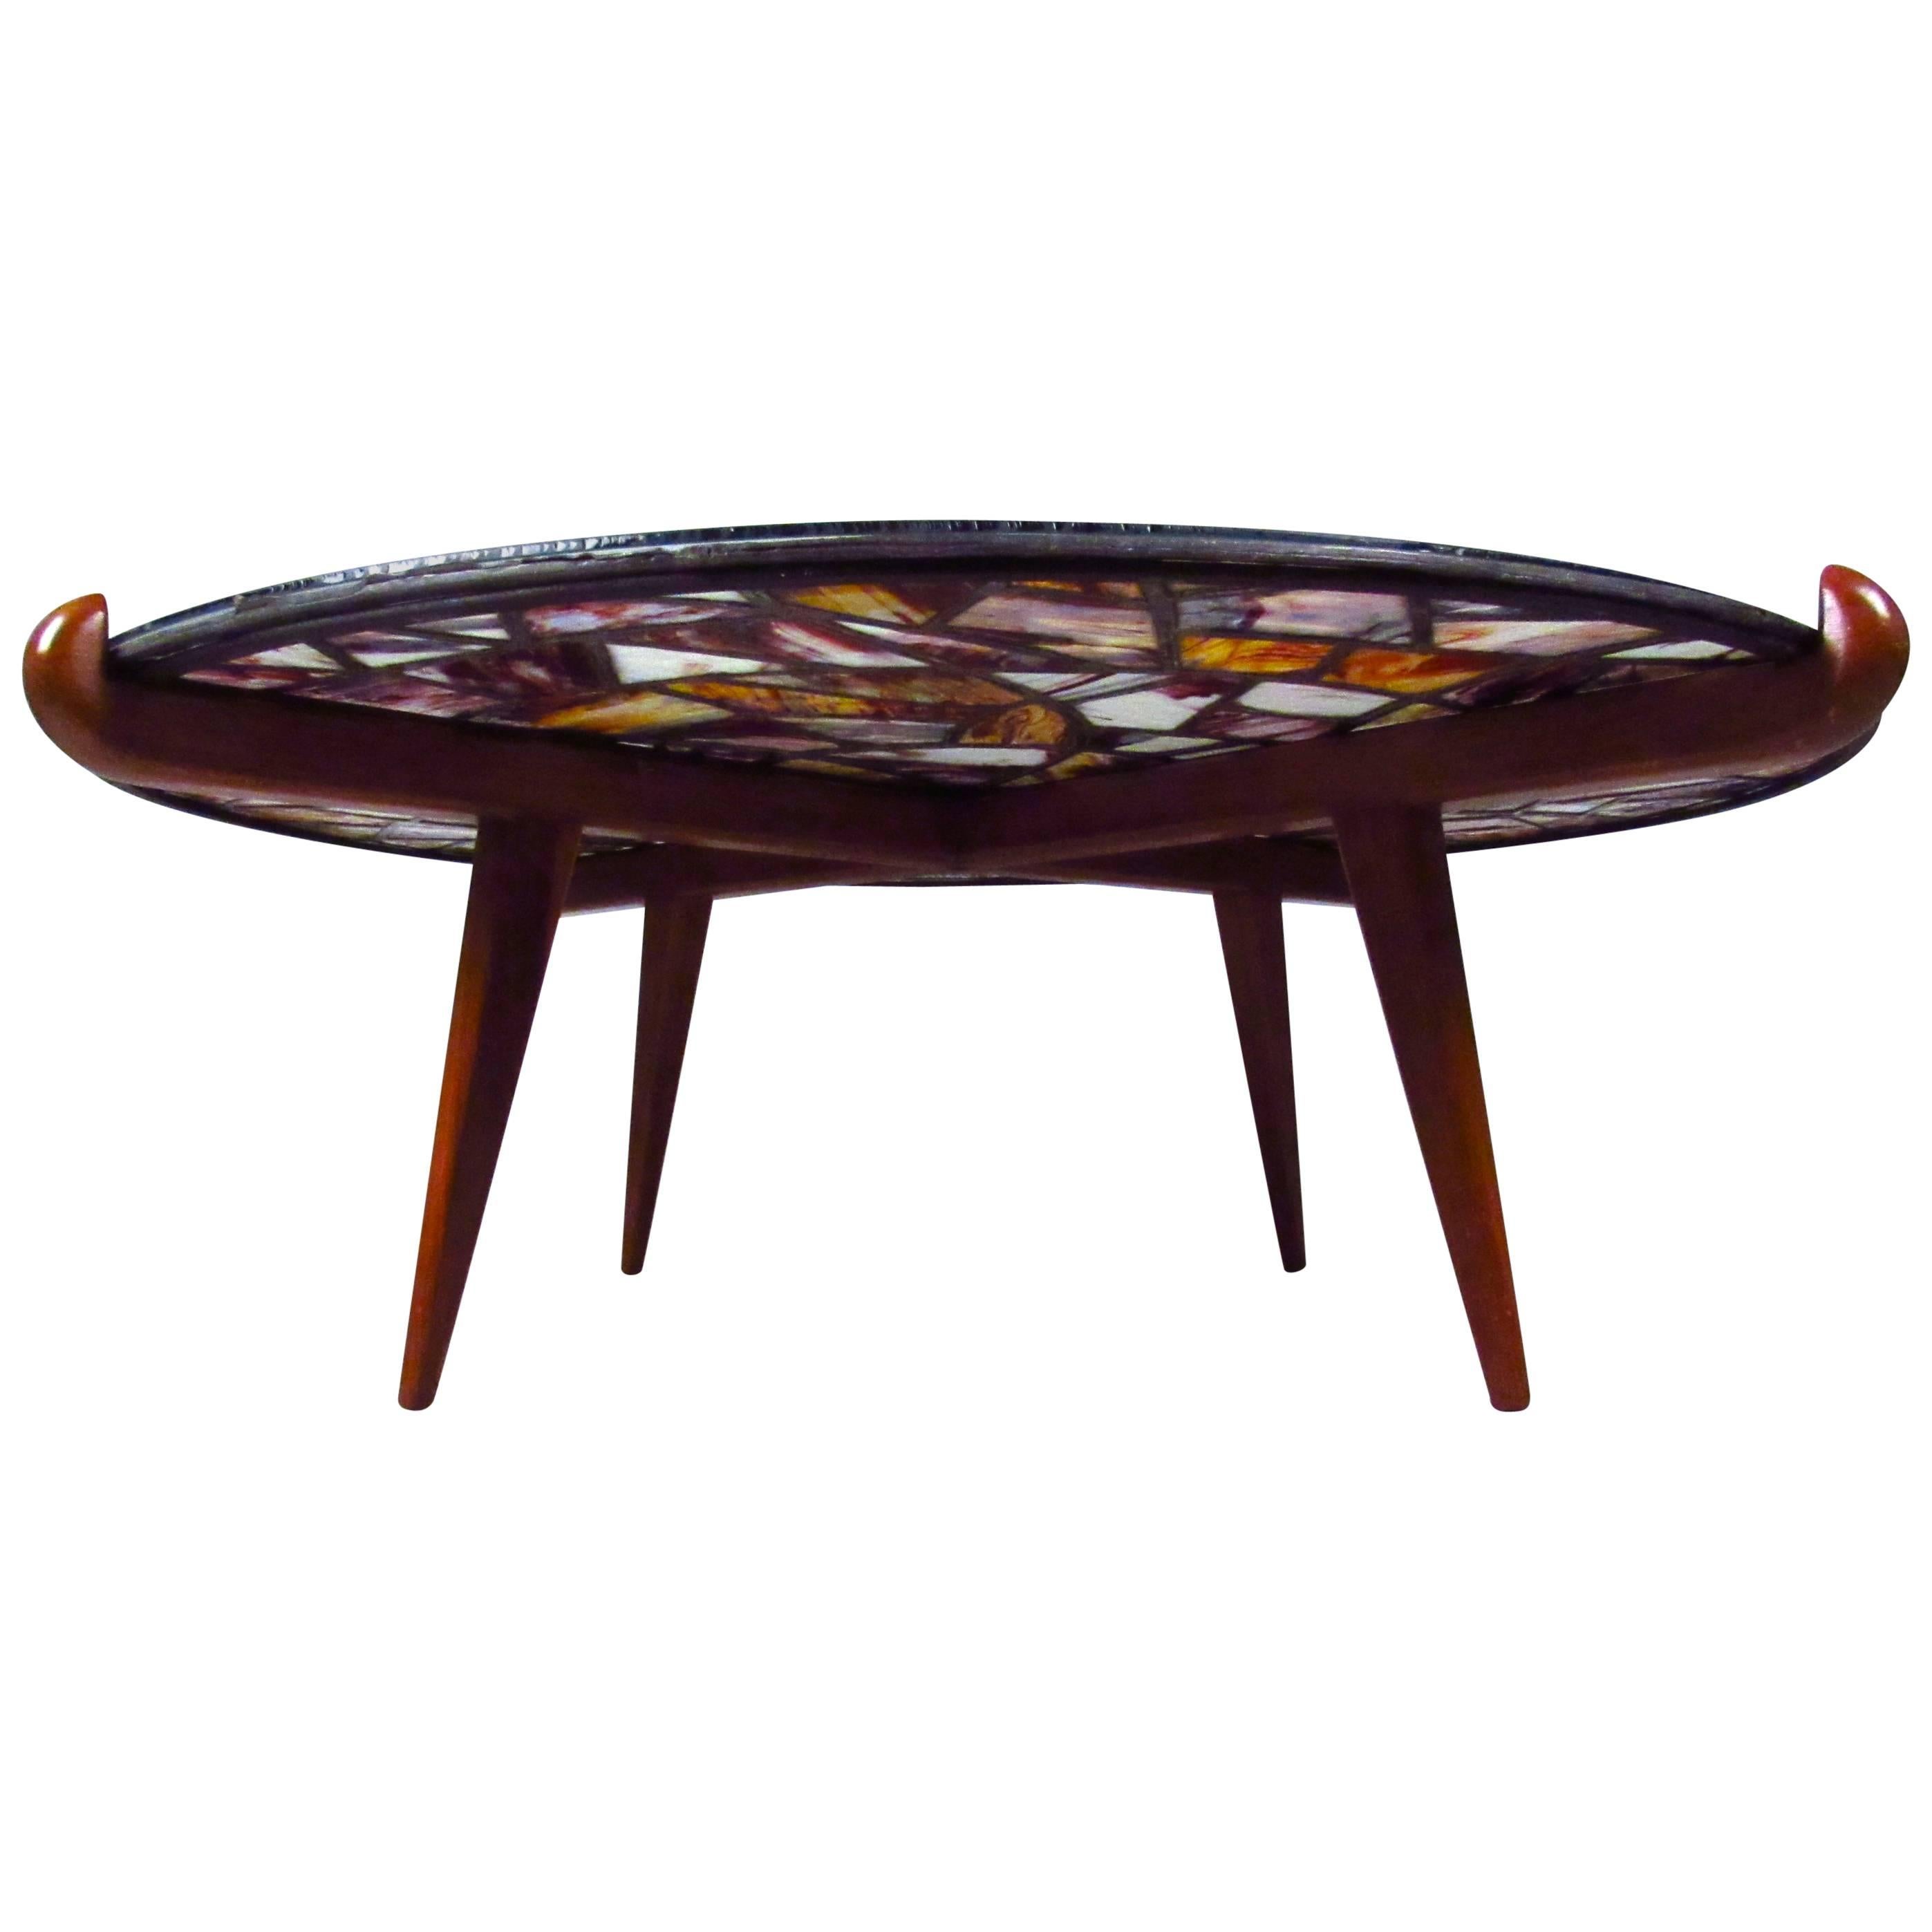 This unique vintage table features a colorful stained glass piece topped with matching glass top, both set into stylish tapered frame. The base is marked by New Hampshire craftsman Walker Weed. Please confirm item location (NY or NJ).